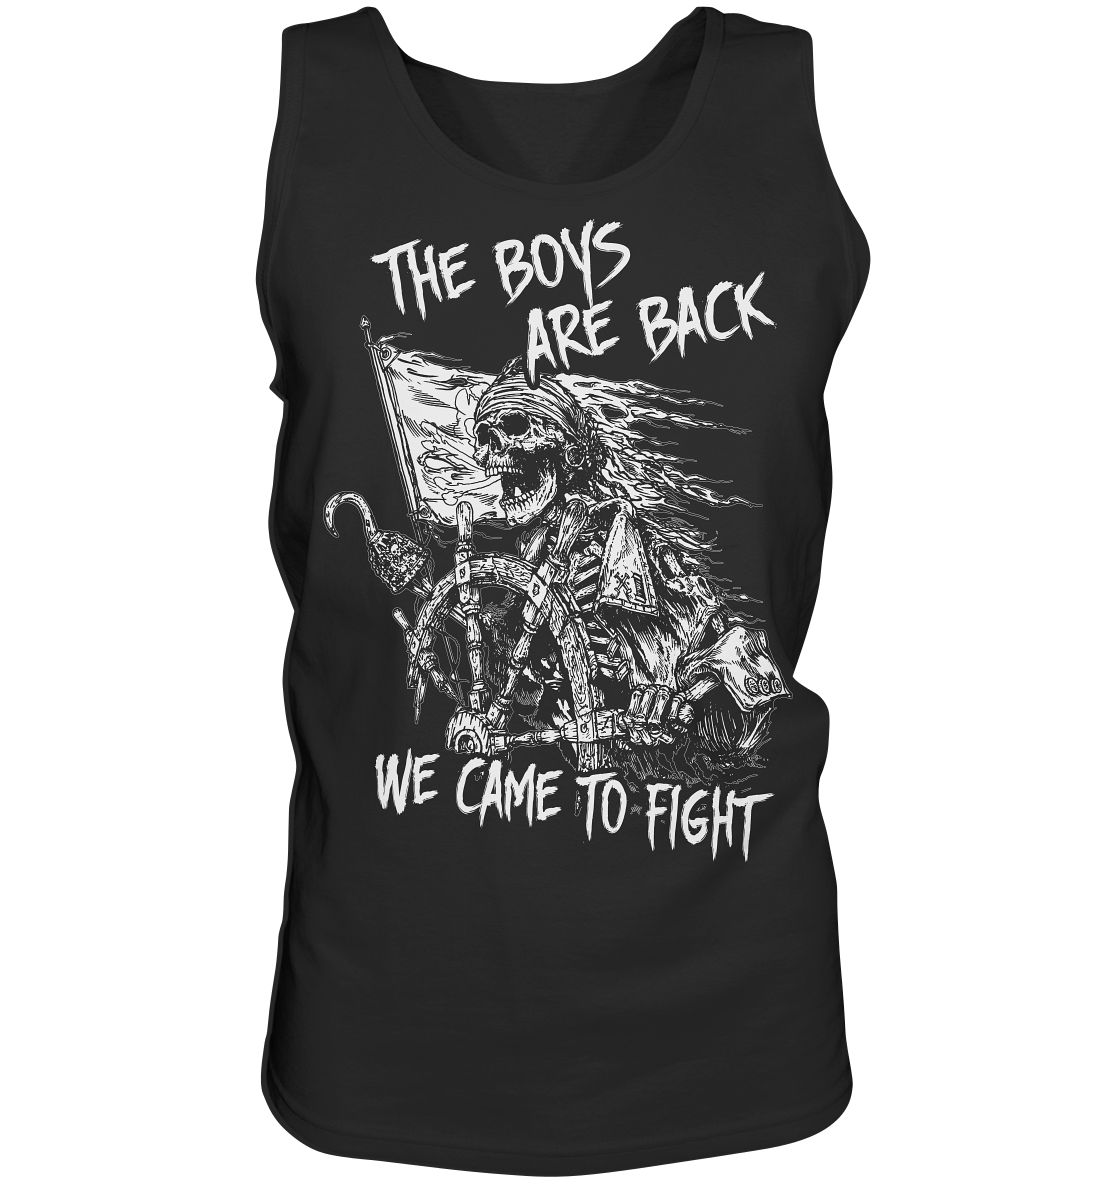 The Boys Are Back "We Came To Fight" - Tank-Top